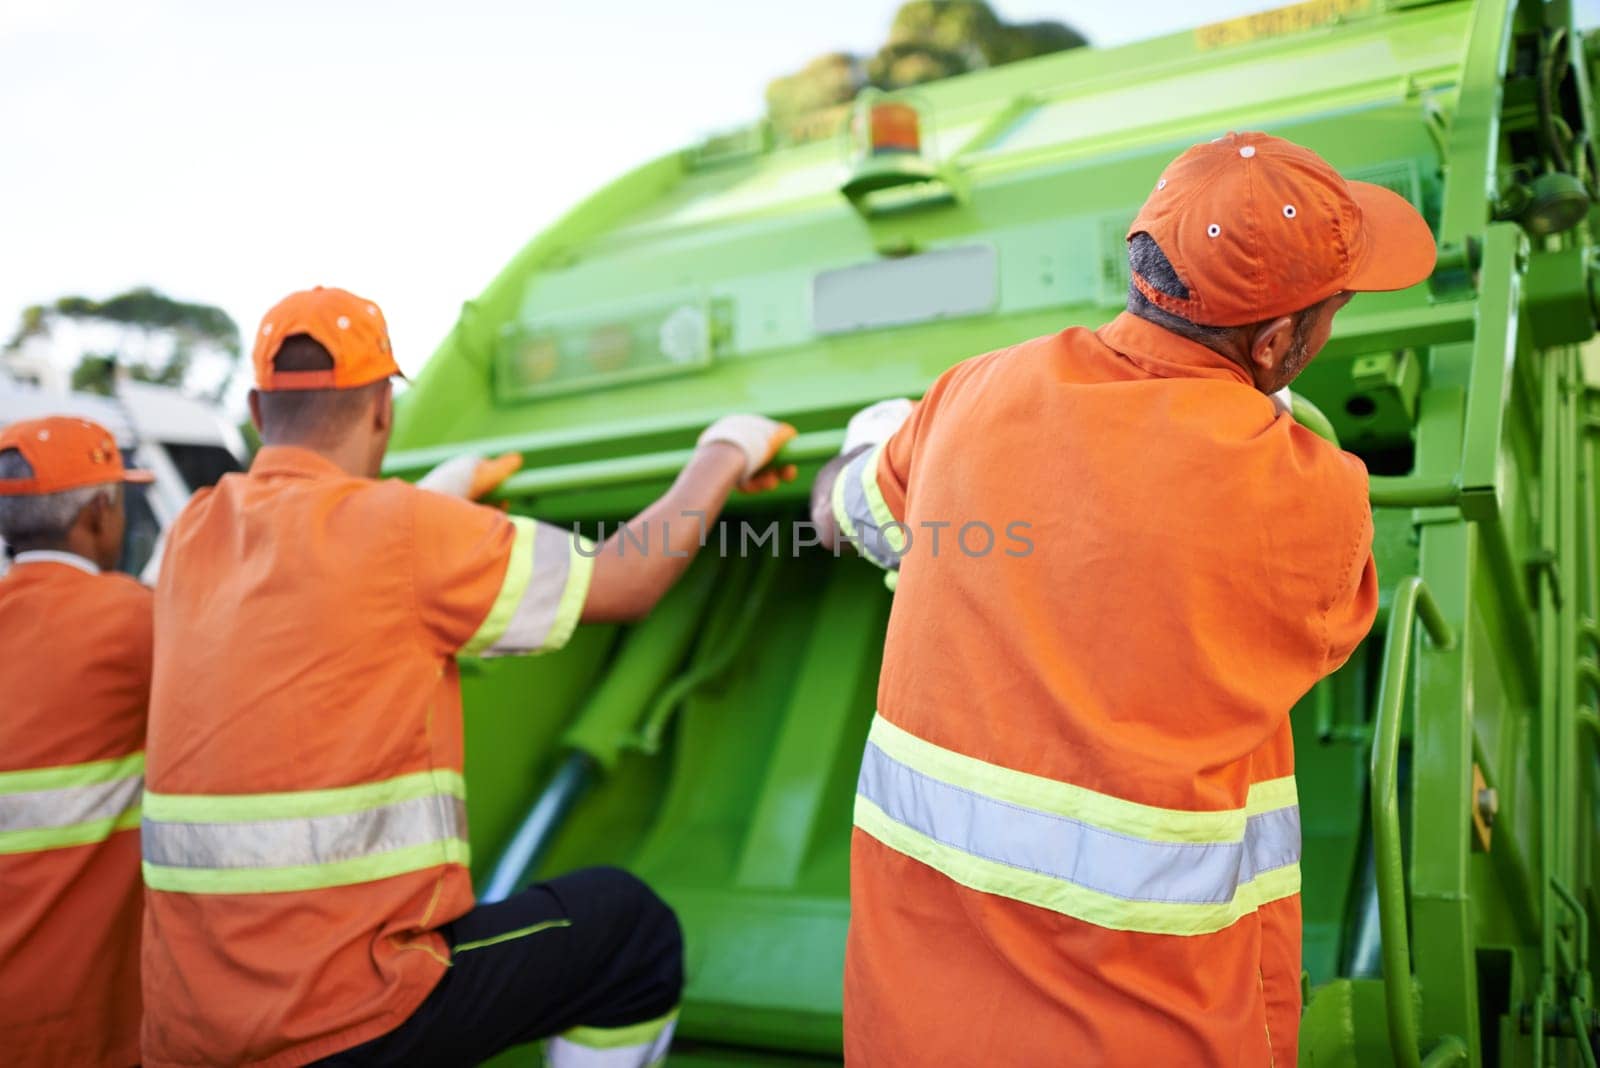 Men, garbage truck and trash collection service for city pollution for cleaning, environment or teamwork. Male people, back and dirt transportation for sidewalk debris in New York, mess or litter.